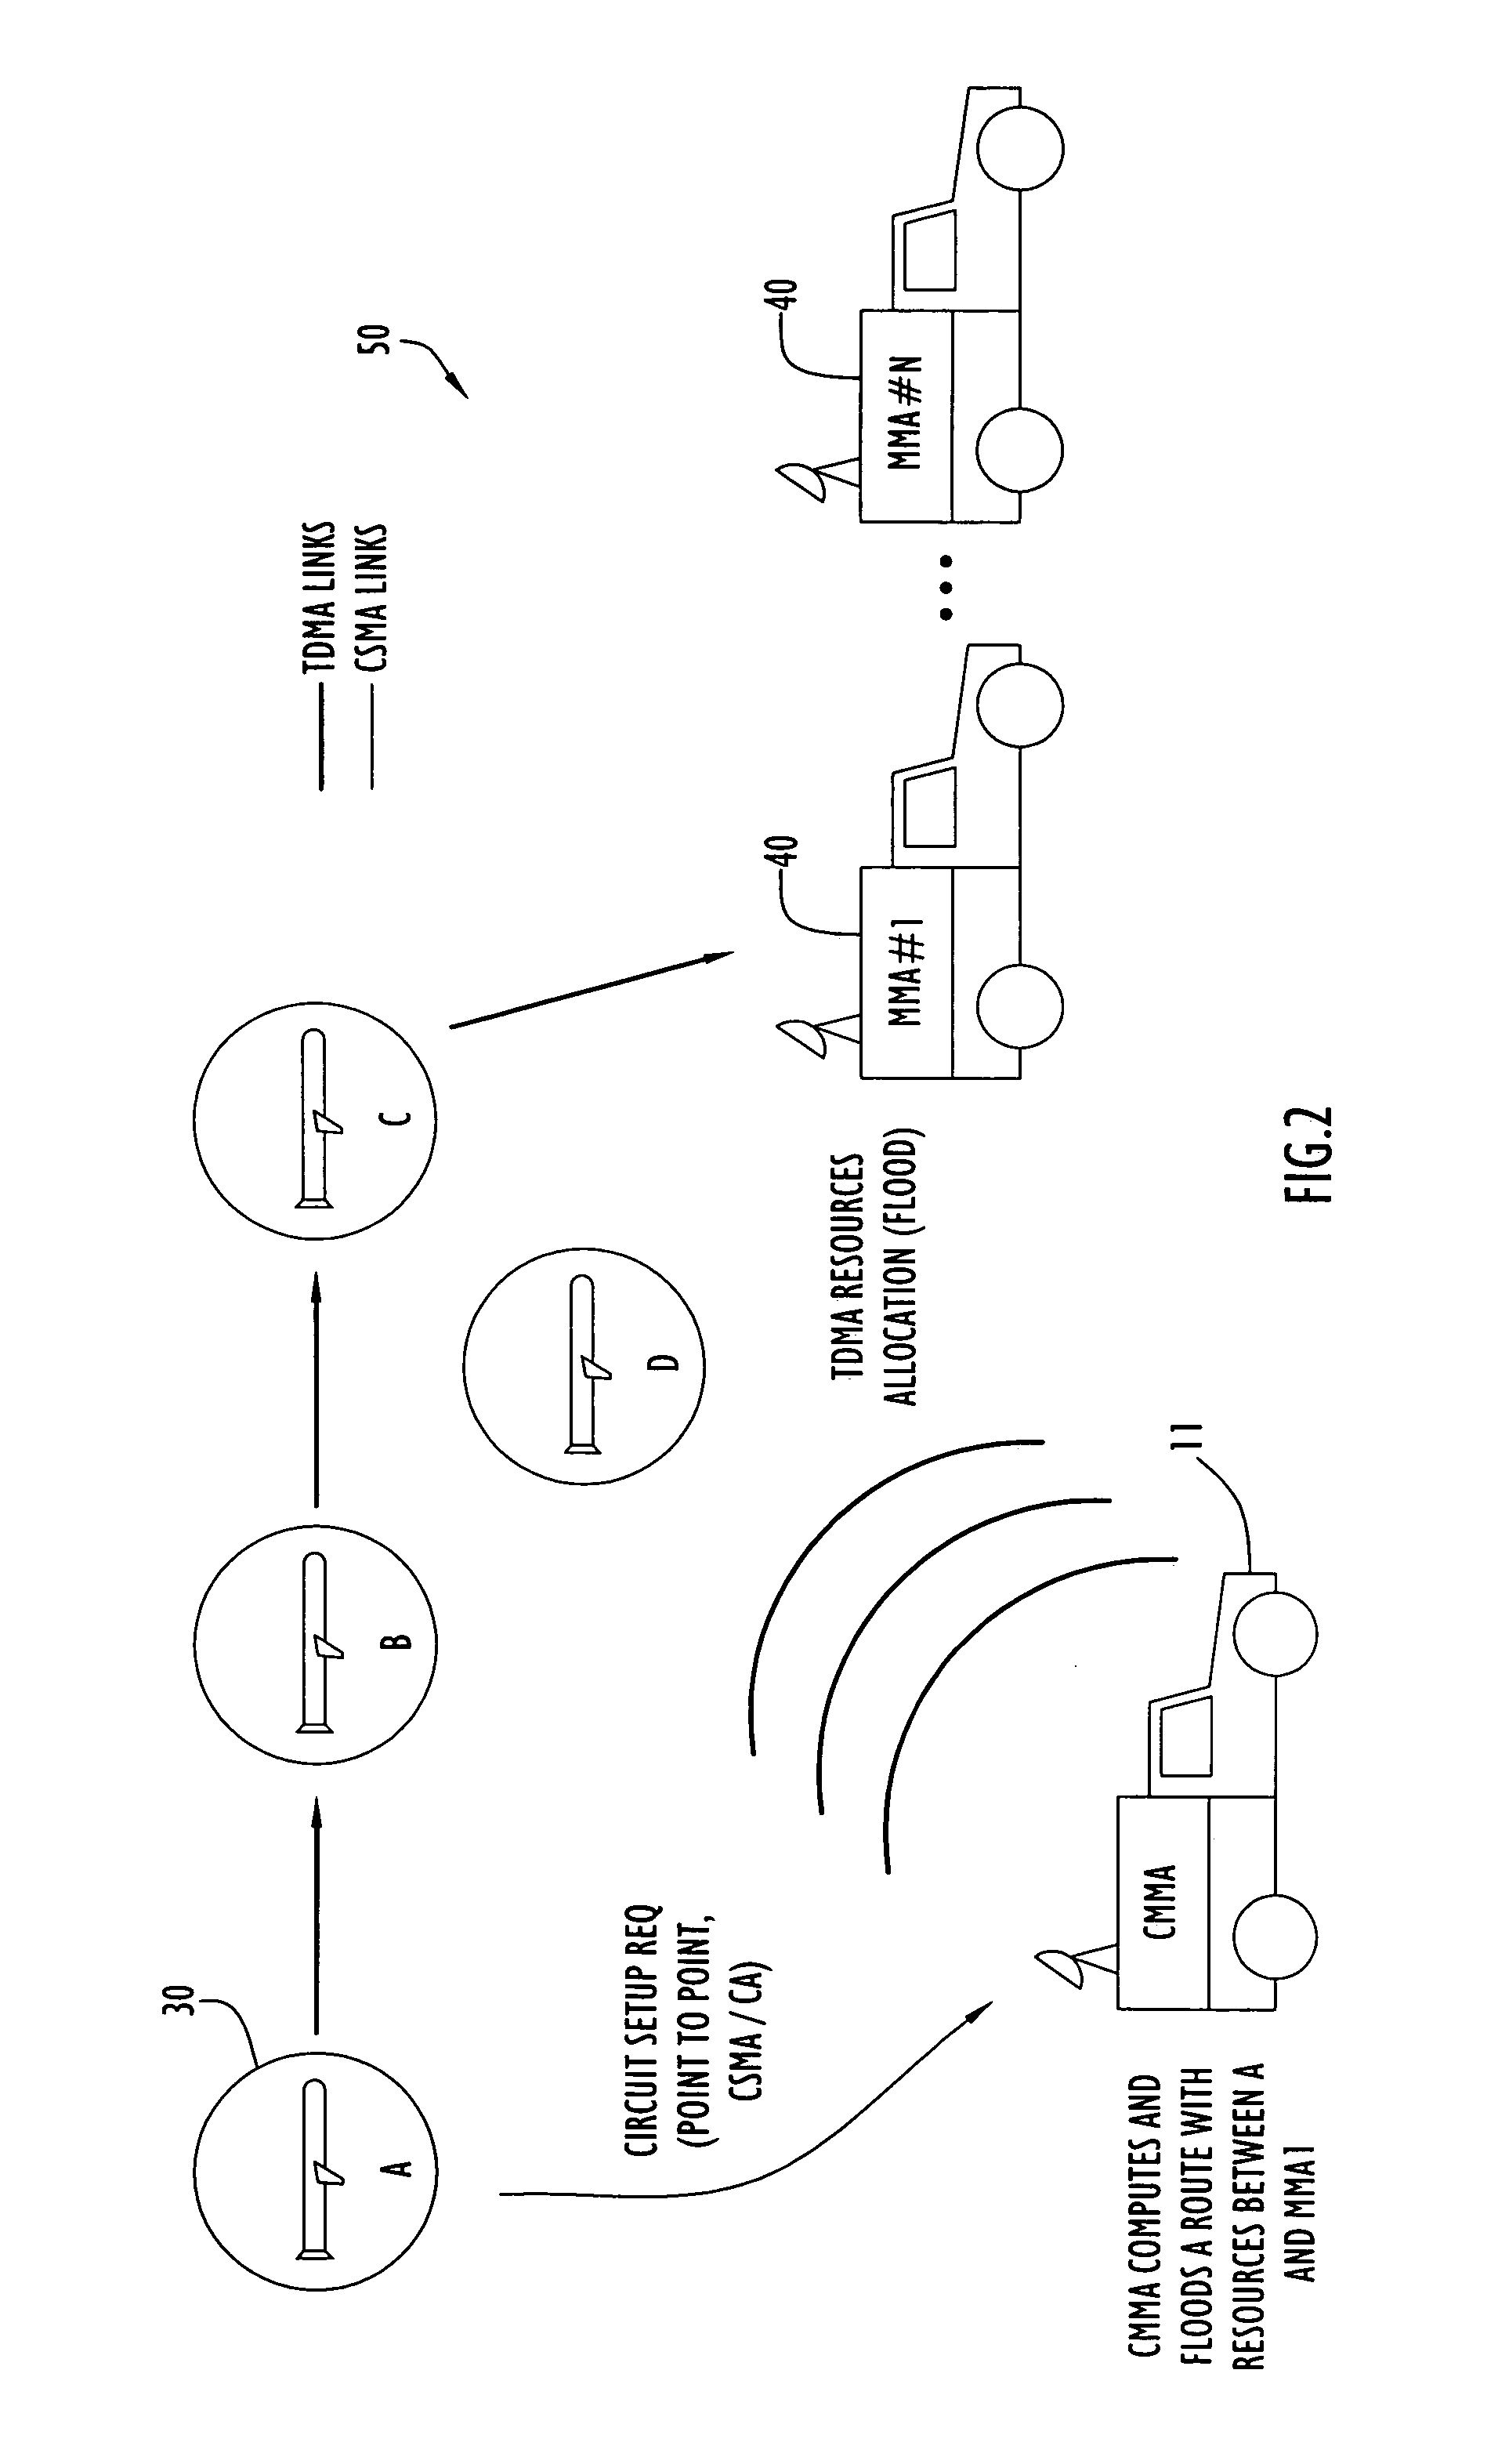 Method and apparatus for dynamic channel access within wireless networks